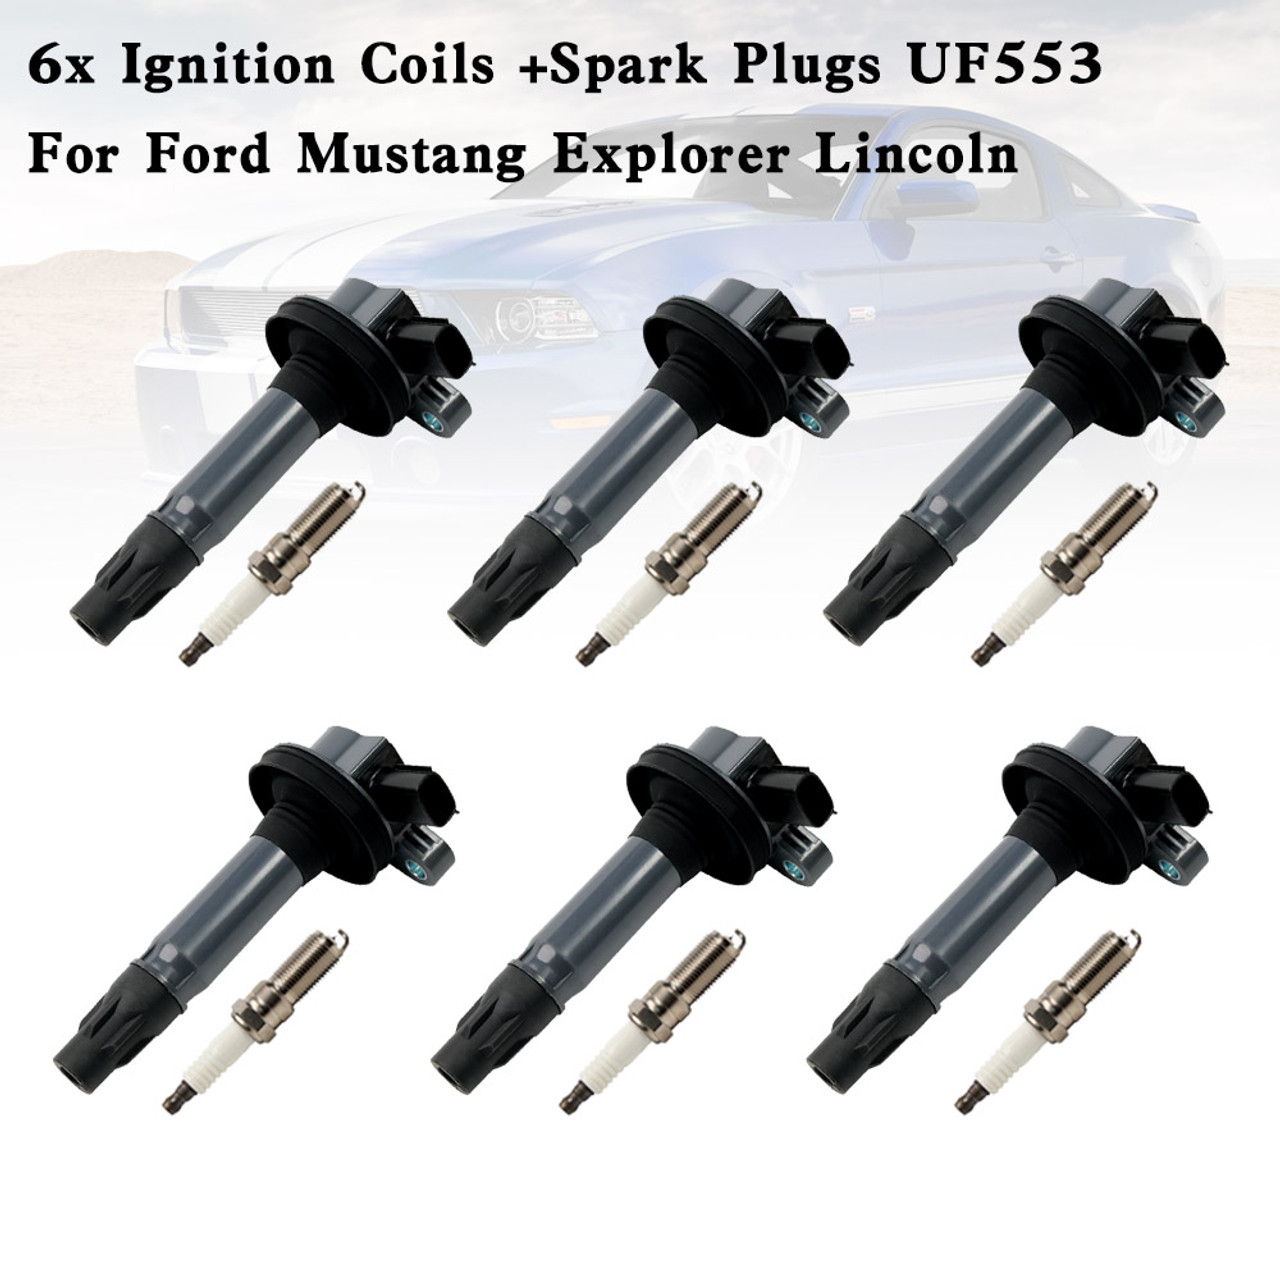 6x Ignition Coils +Spark Plugs UF553 For Ford Mustang Explorer Lincoln